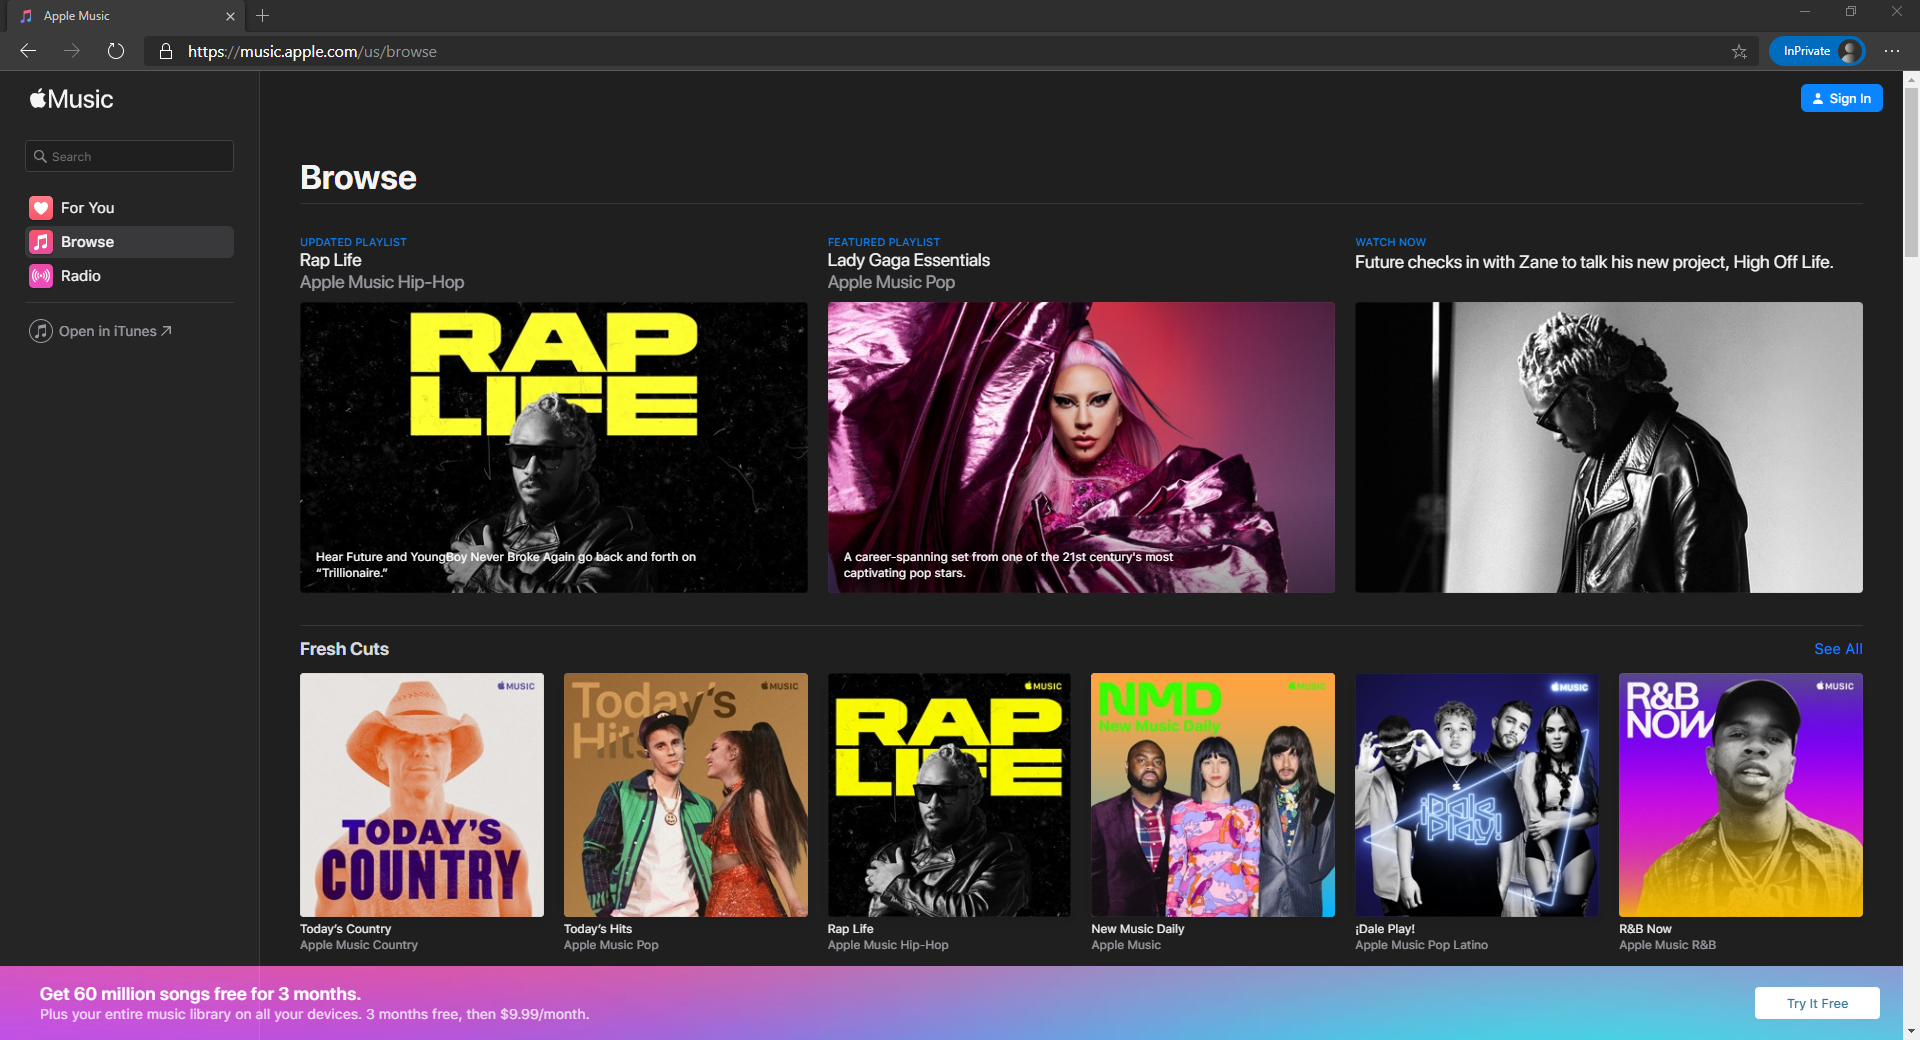 Apple Music Web Player officially out of beta? | MacRumors ...